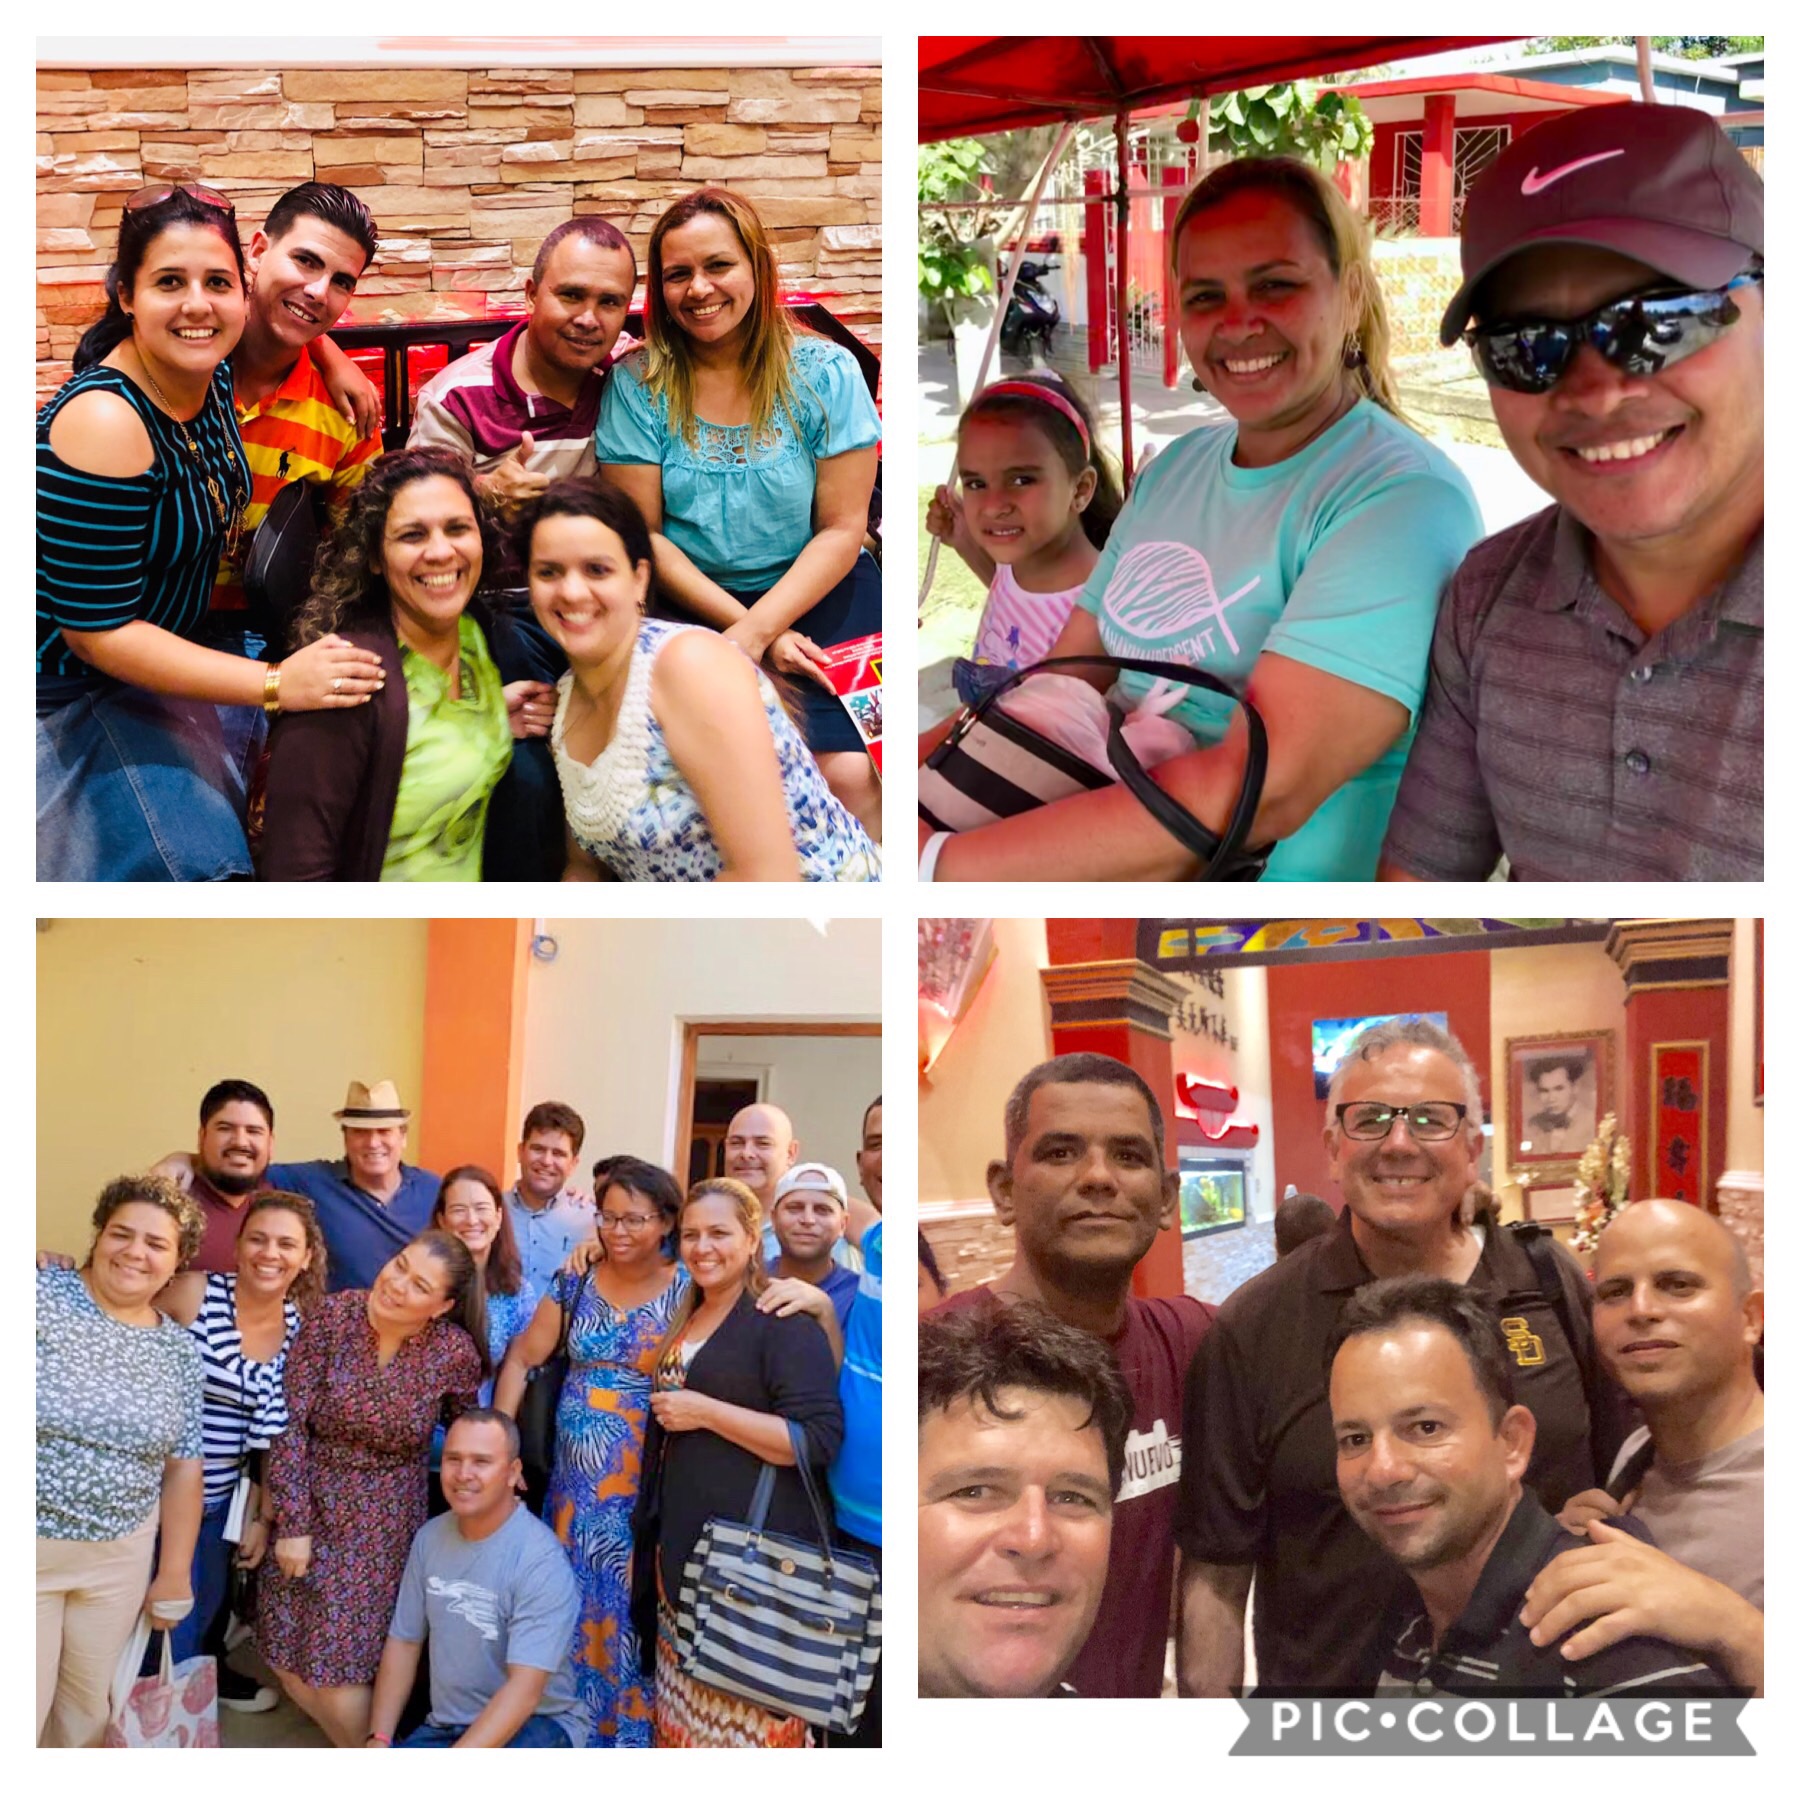 Our dear friends and growing family in Cuba!